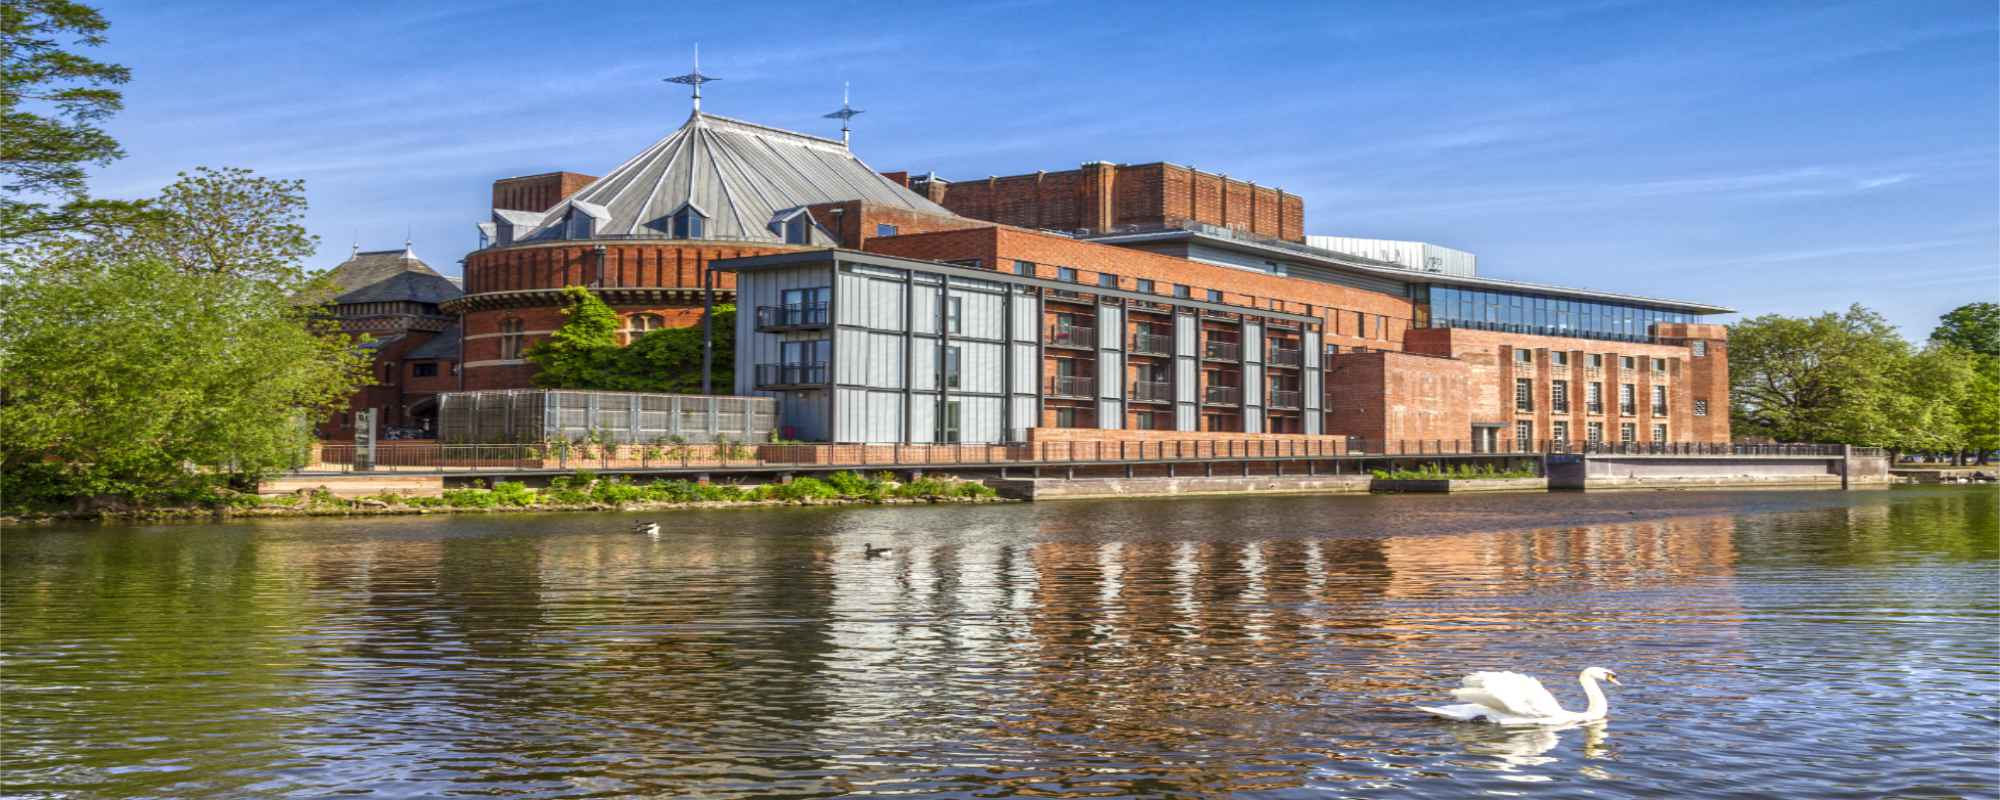 The Royal Shakespeare Theatre in Stratford-upon-Avon